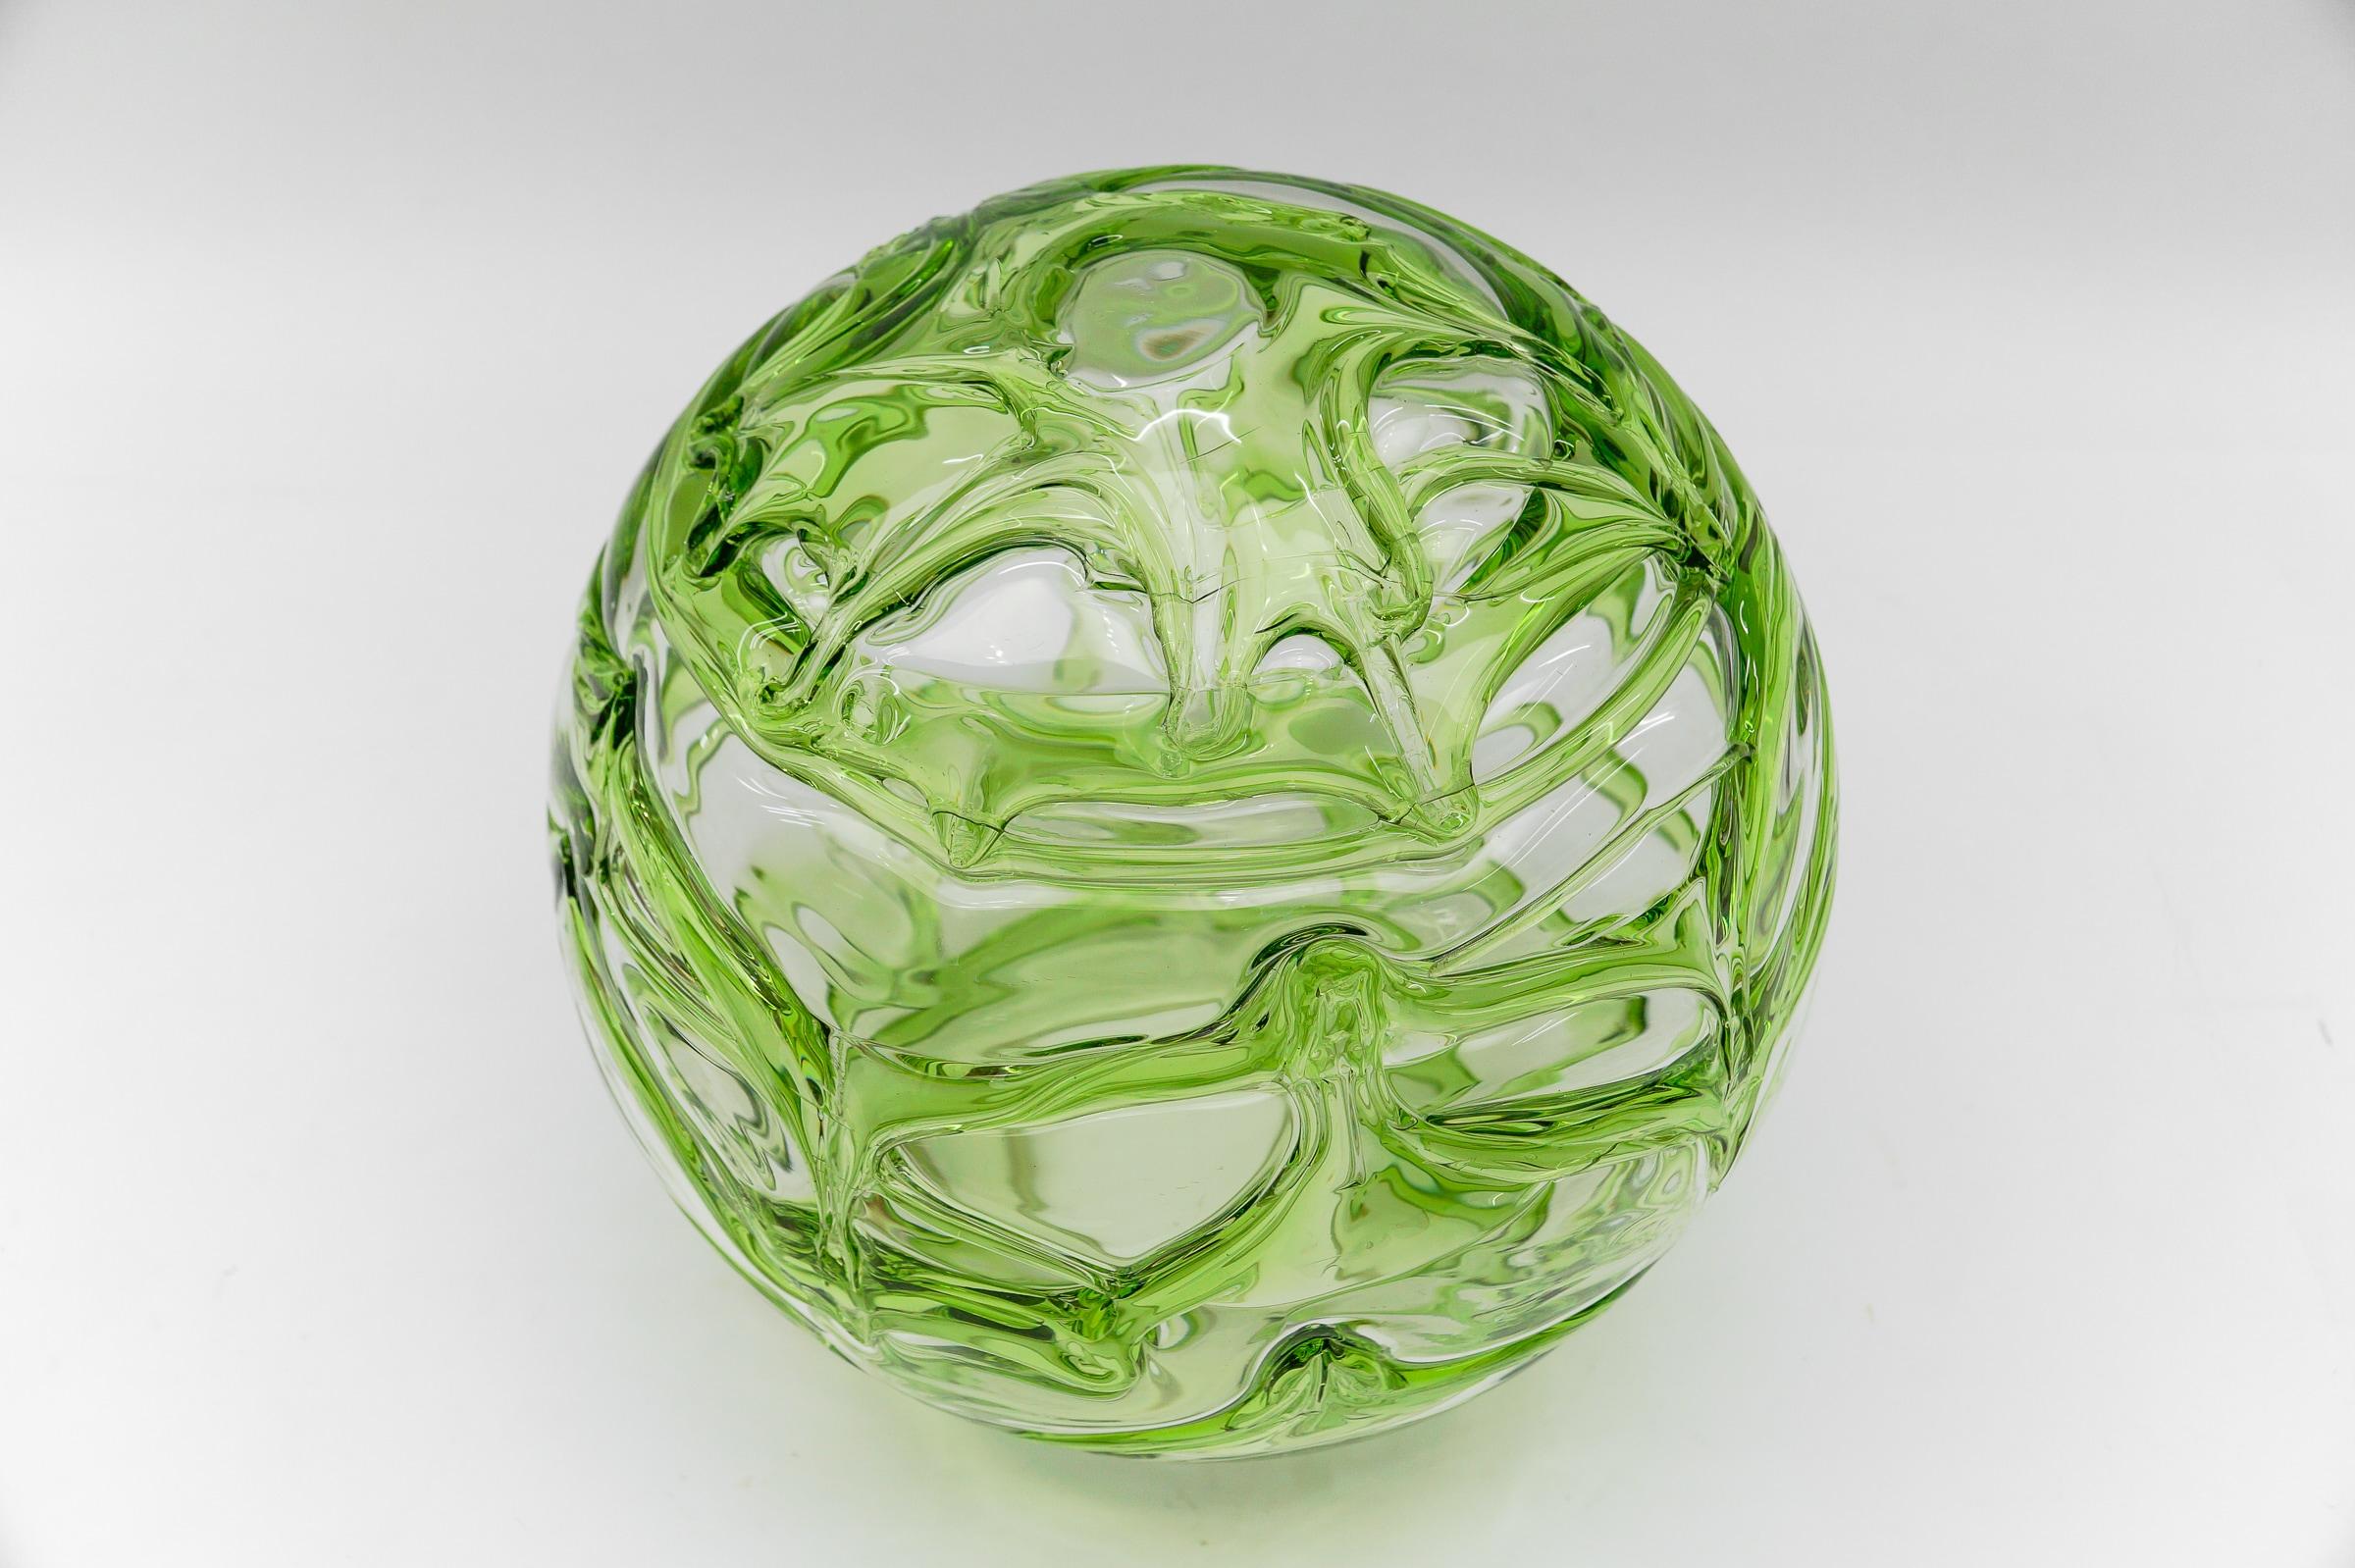 Large Green Murano Glass Ball Pendant Lamp by Doria, - 1960s Germany For Sale 9